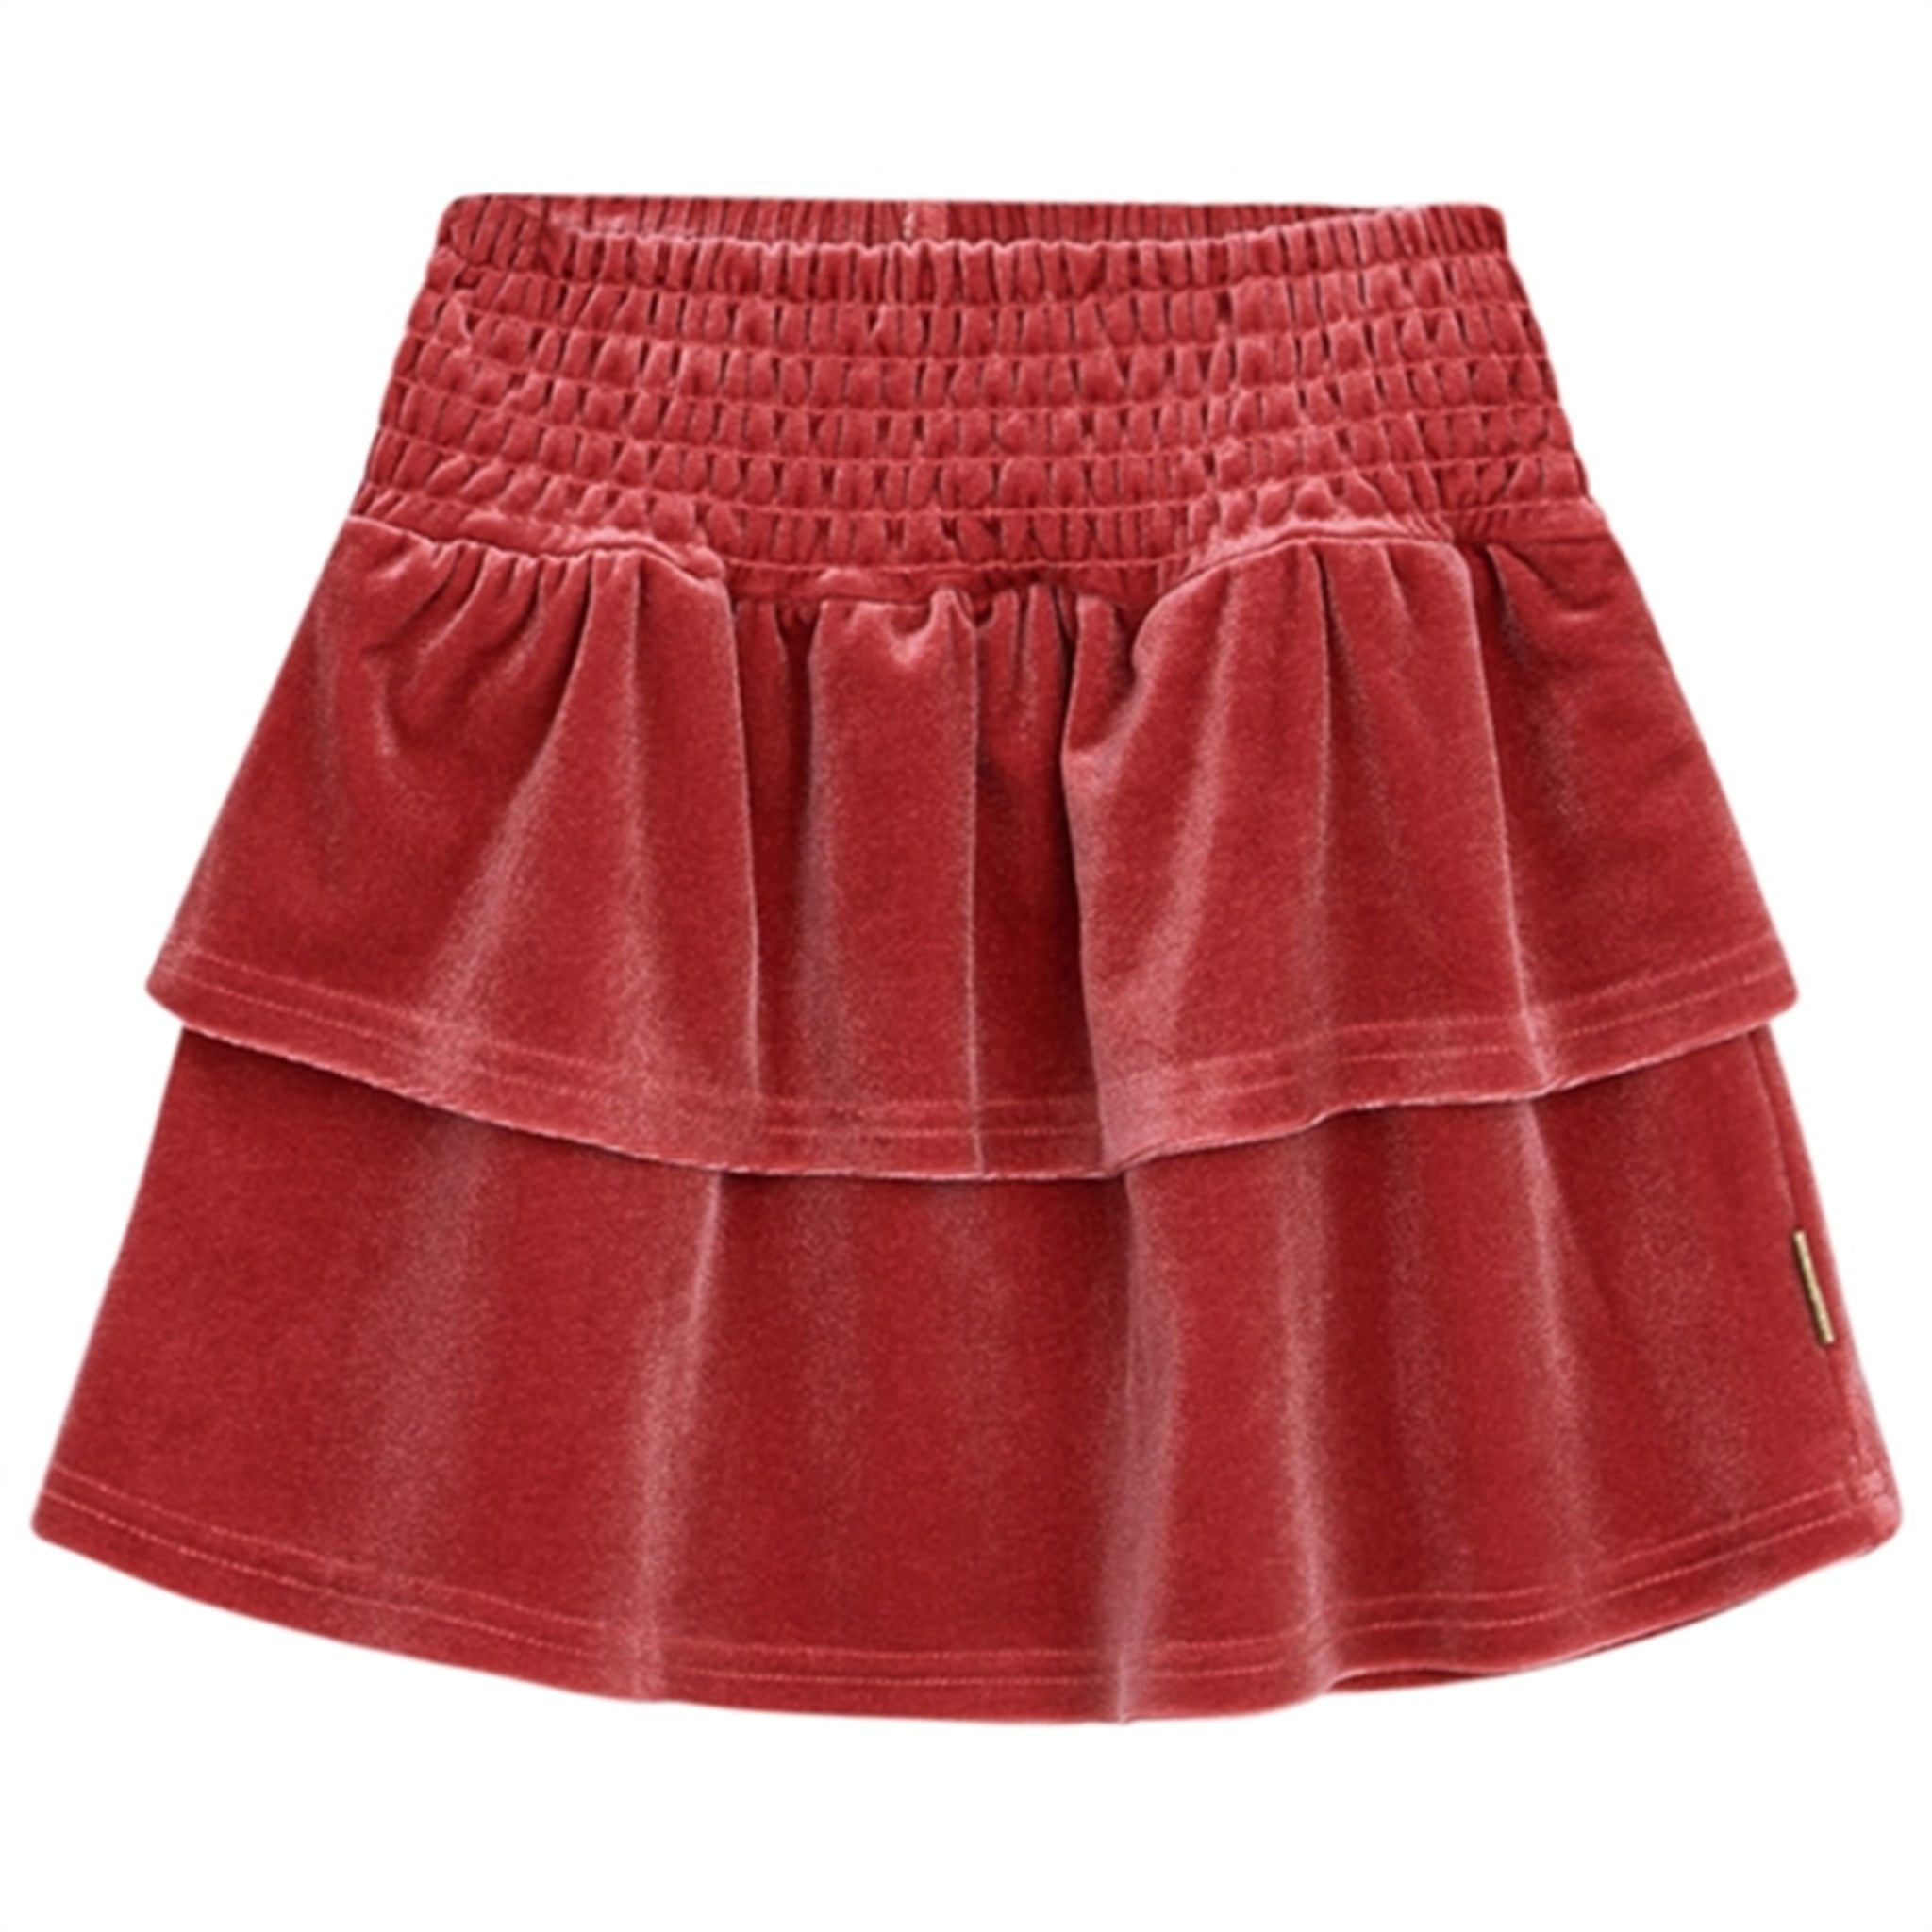 Hust & Claire Mini Teaberry Niena Skirt